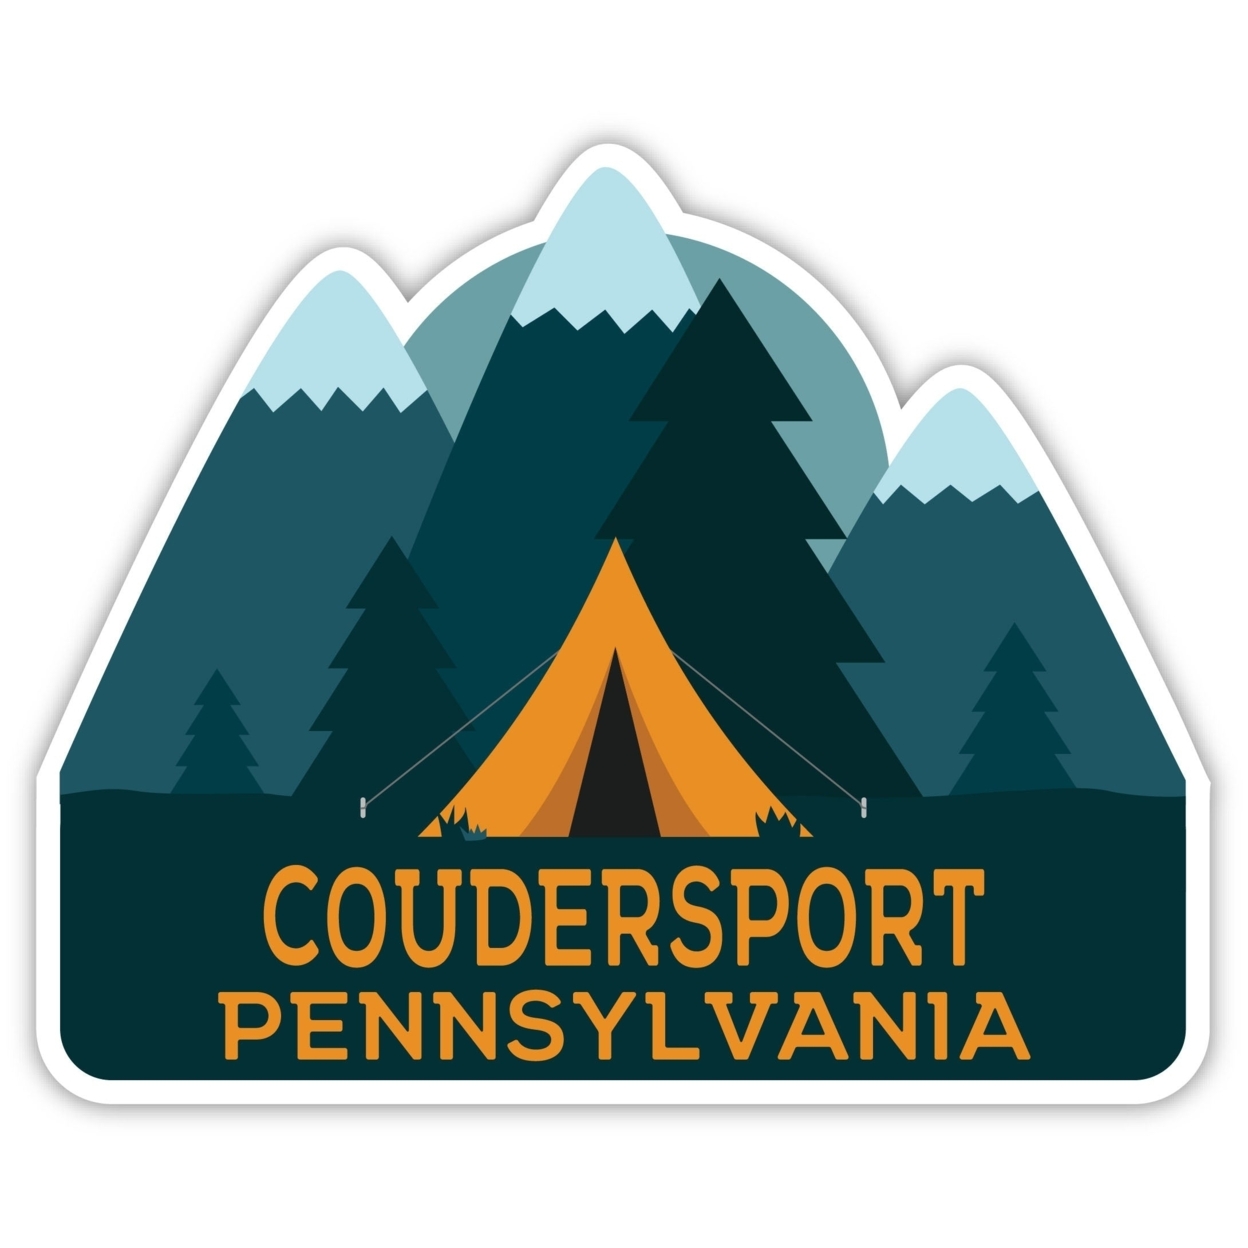 Coudersport Pennsylvania Souvenir Decorative Stickers (Choose Theme And Size) - 4-Pack, 4-Inch, Bear